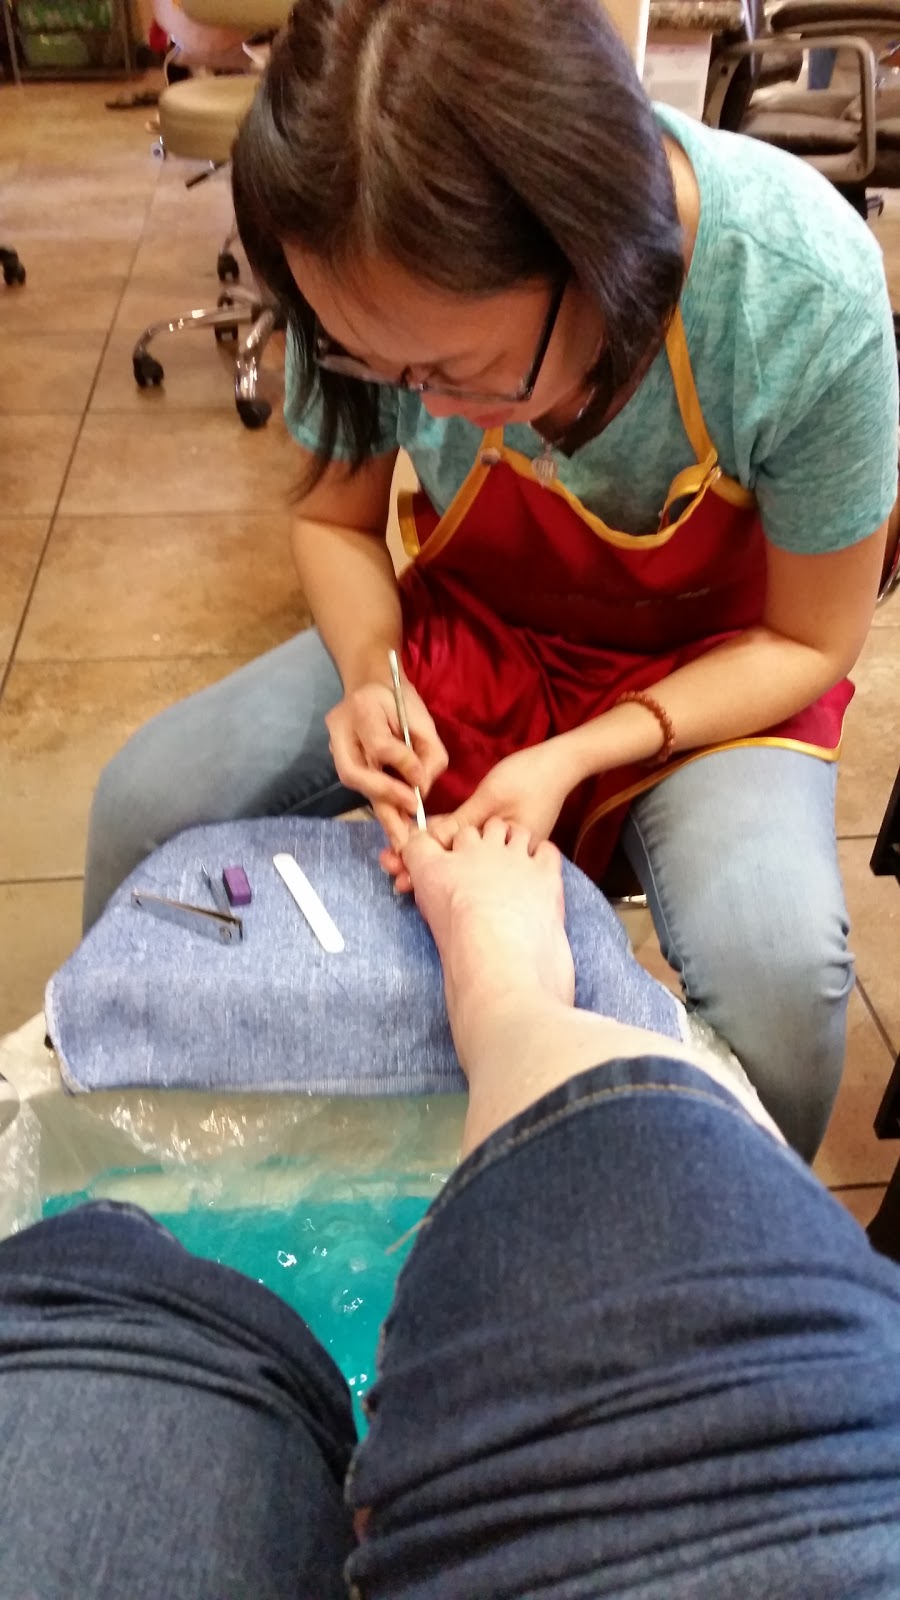 Gallery Nails & Spa | 210 Peabody Rd, Vacaville, CA 95687 | Phone: (707) 451-1144